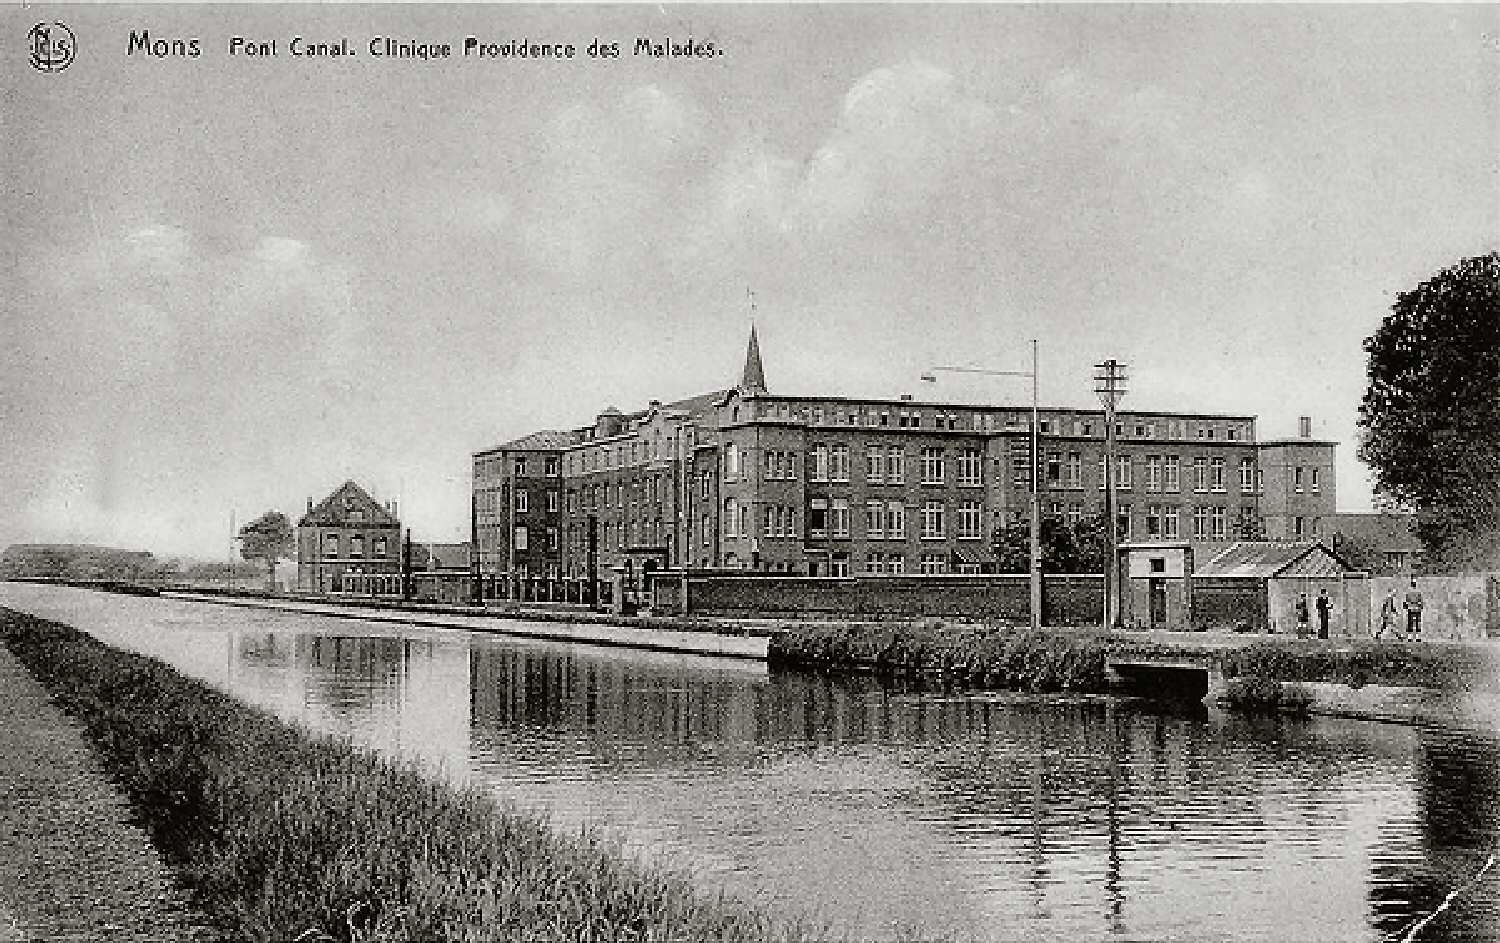 Mons - Institut Providence des Malades - Pont-Canal.